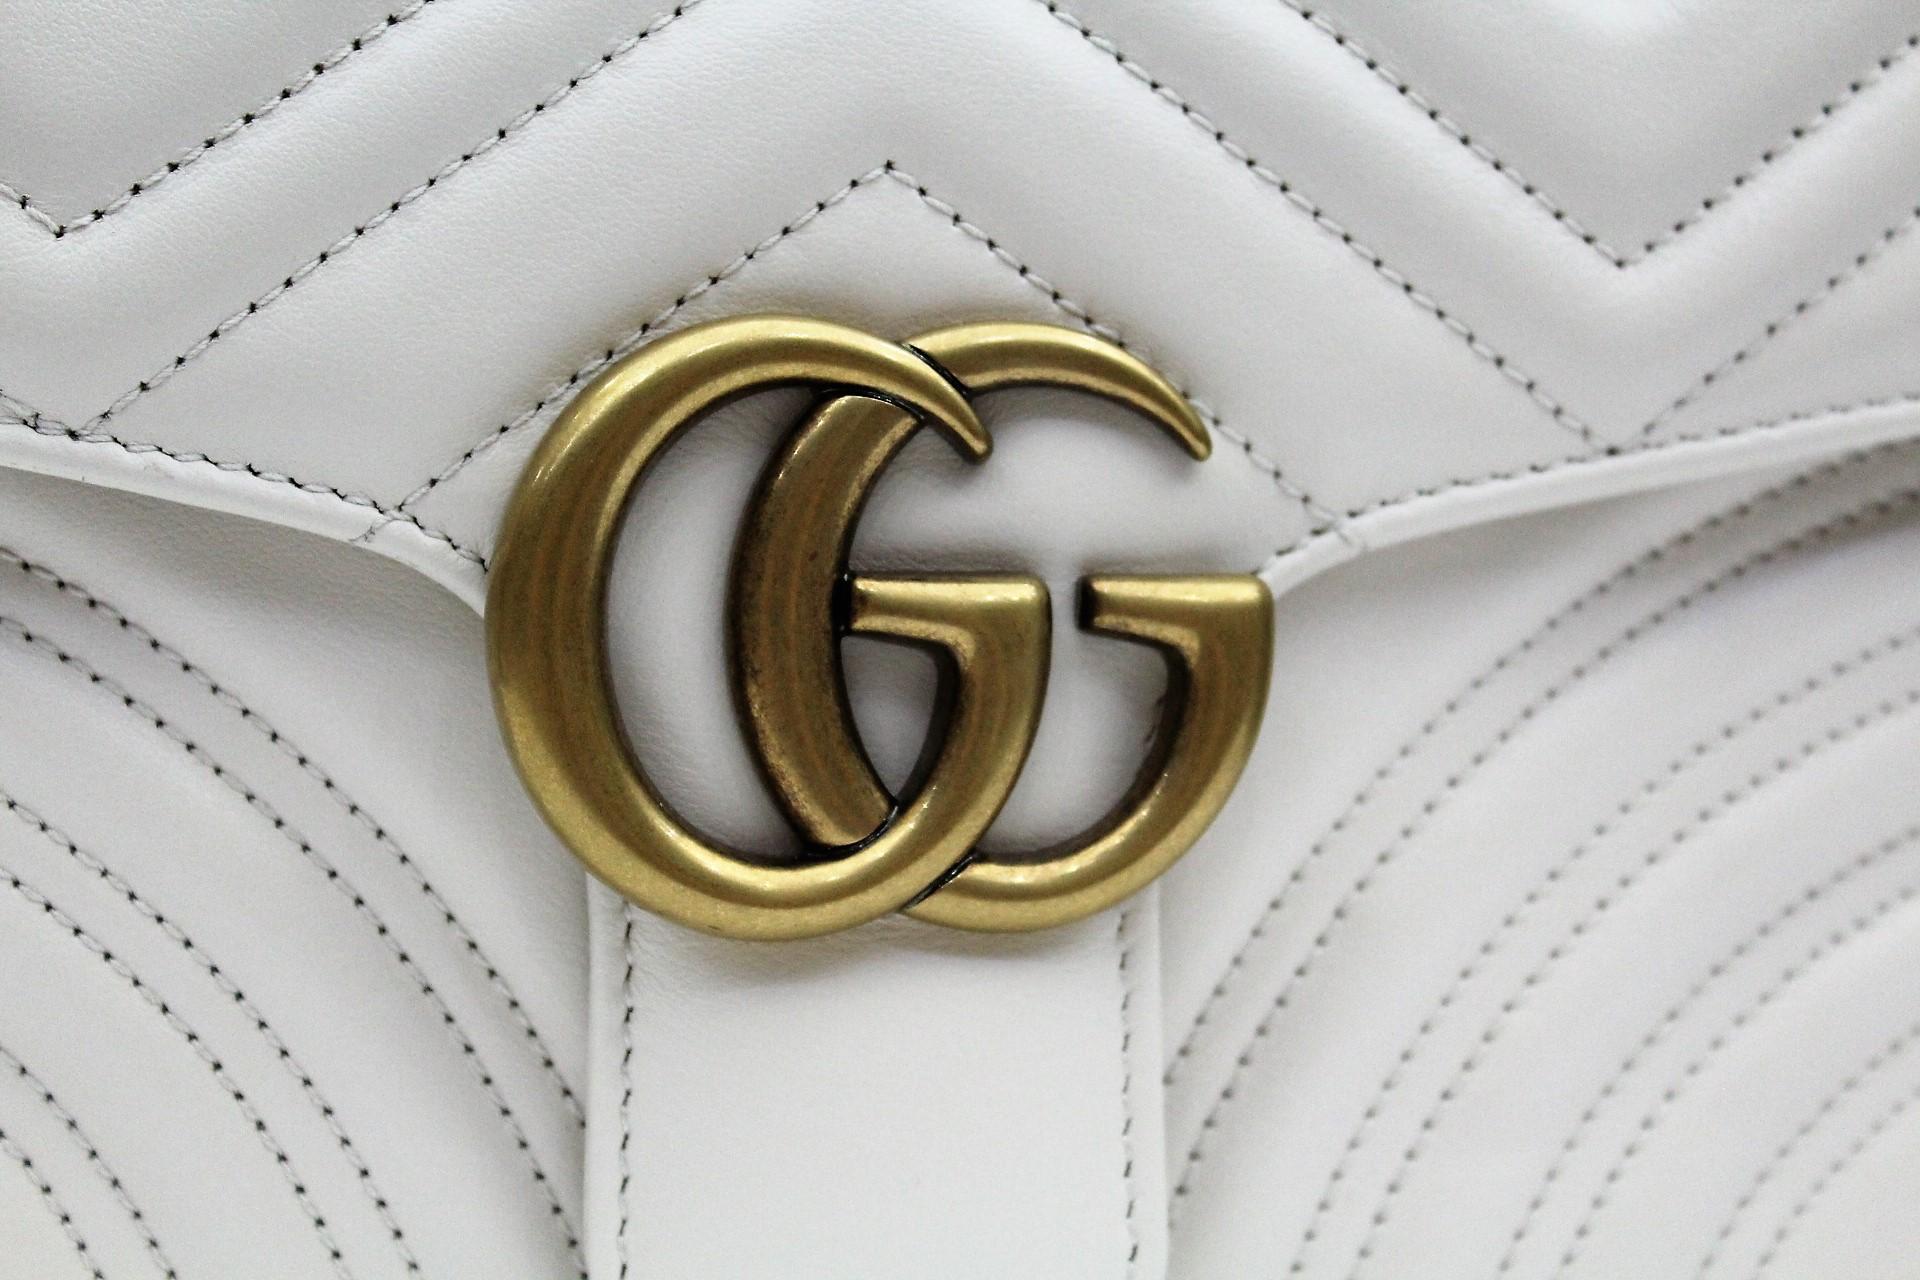 There is , in the Marmont family , this beautiful Gucci shoulder bag .
White matelassé
Web nylon shoulder
Gold Hardware
Chevron Style
Perfect conditions whit card and dust bag 